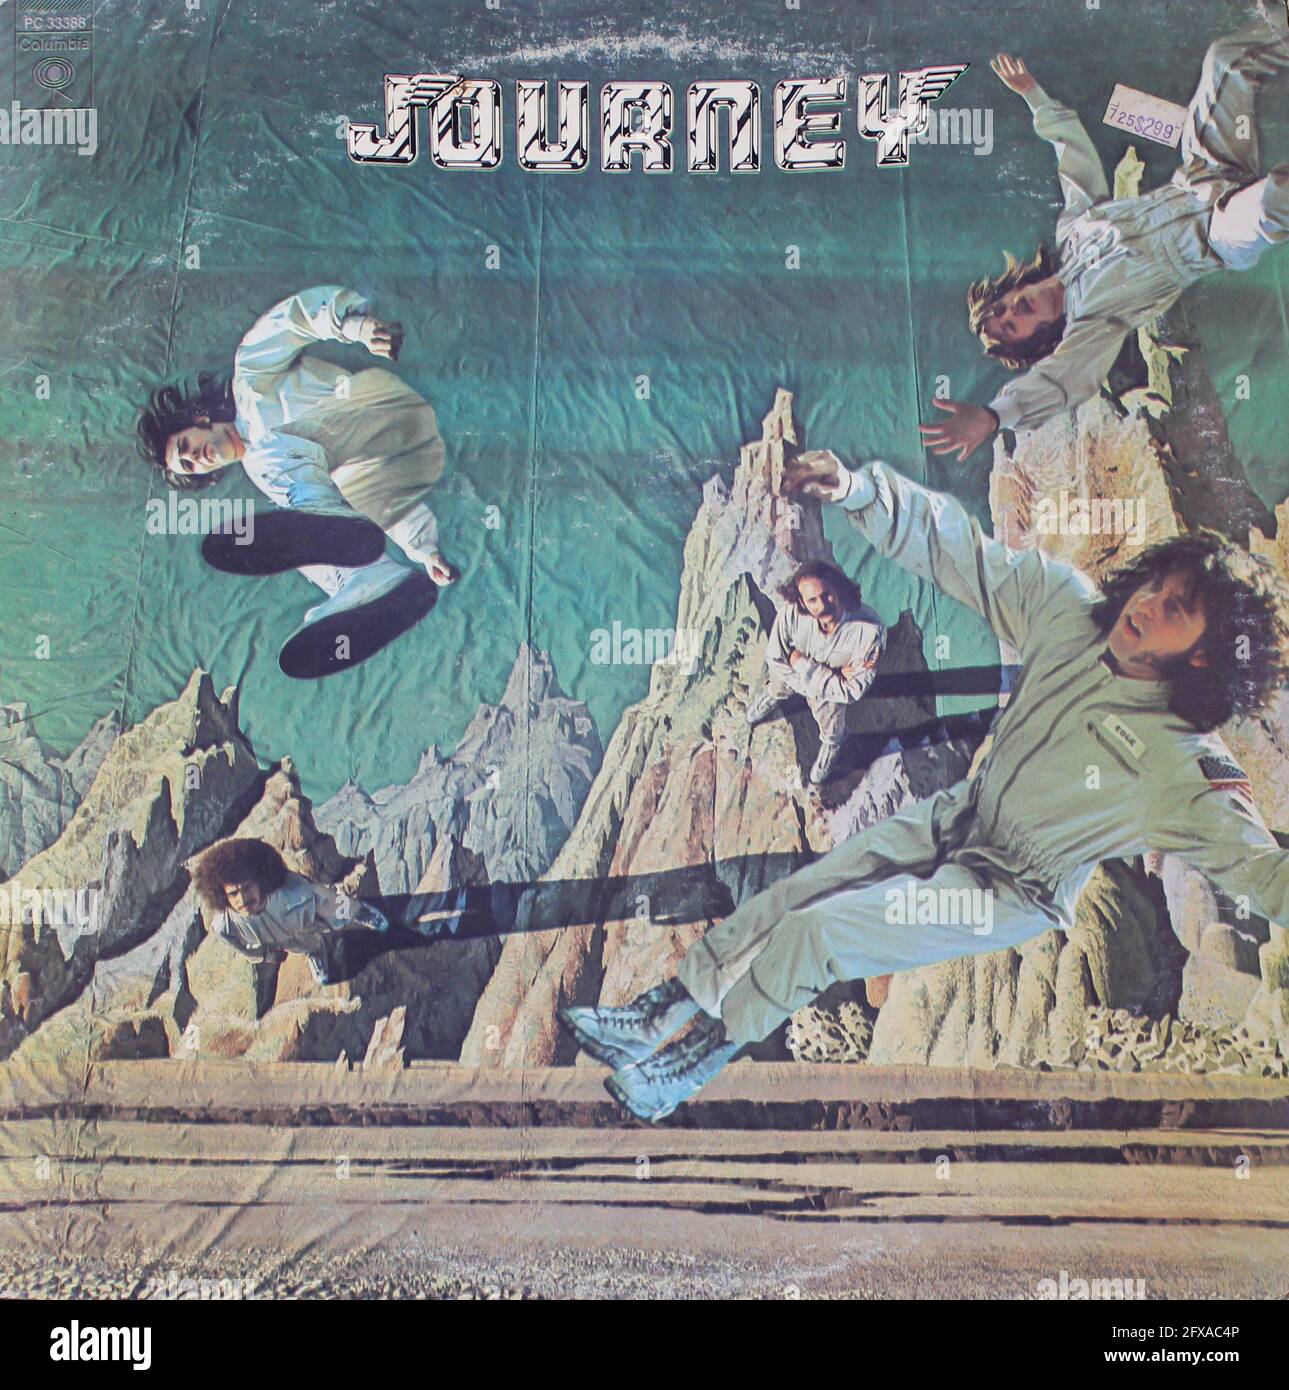 Hard rock and soft rock band, Journey band music album on vinyl record LP disc. Self-titled debut album Journey album cover Stock Photo